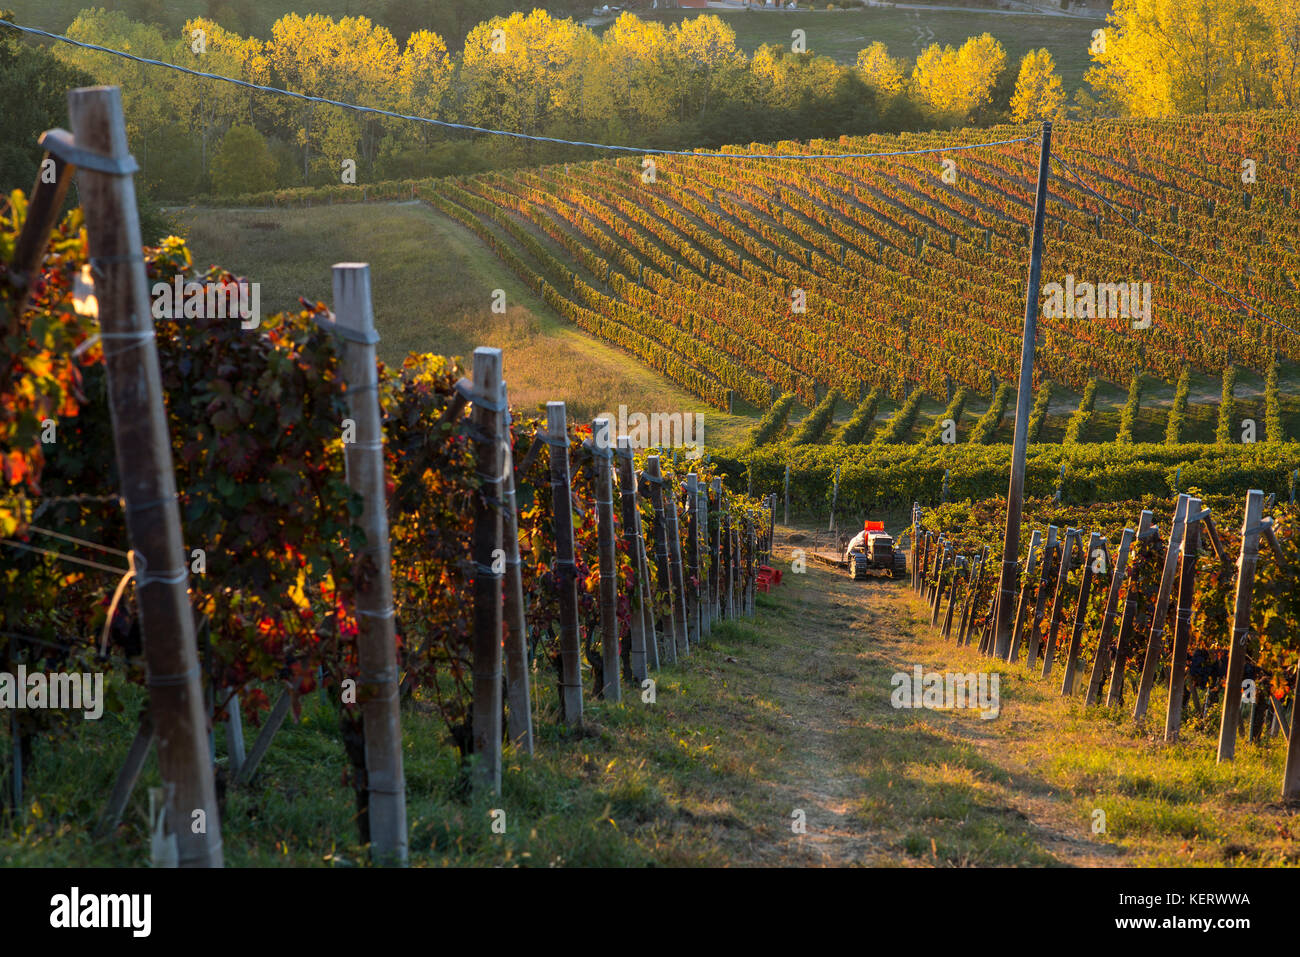 Vineyards and Tractor at Sunset, Monforte d’Alba, Piedmont, Italy Stock Photo